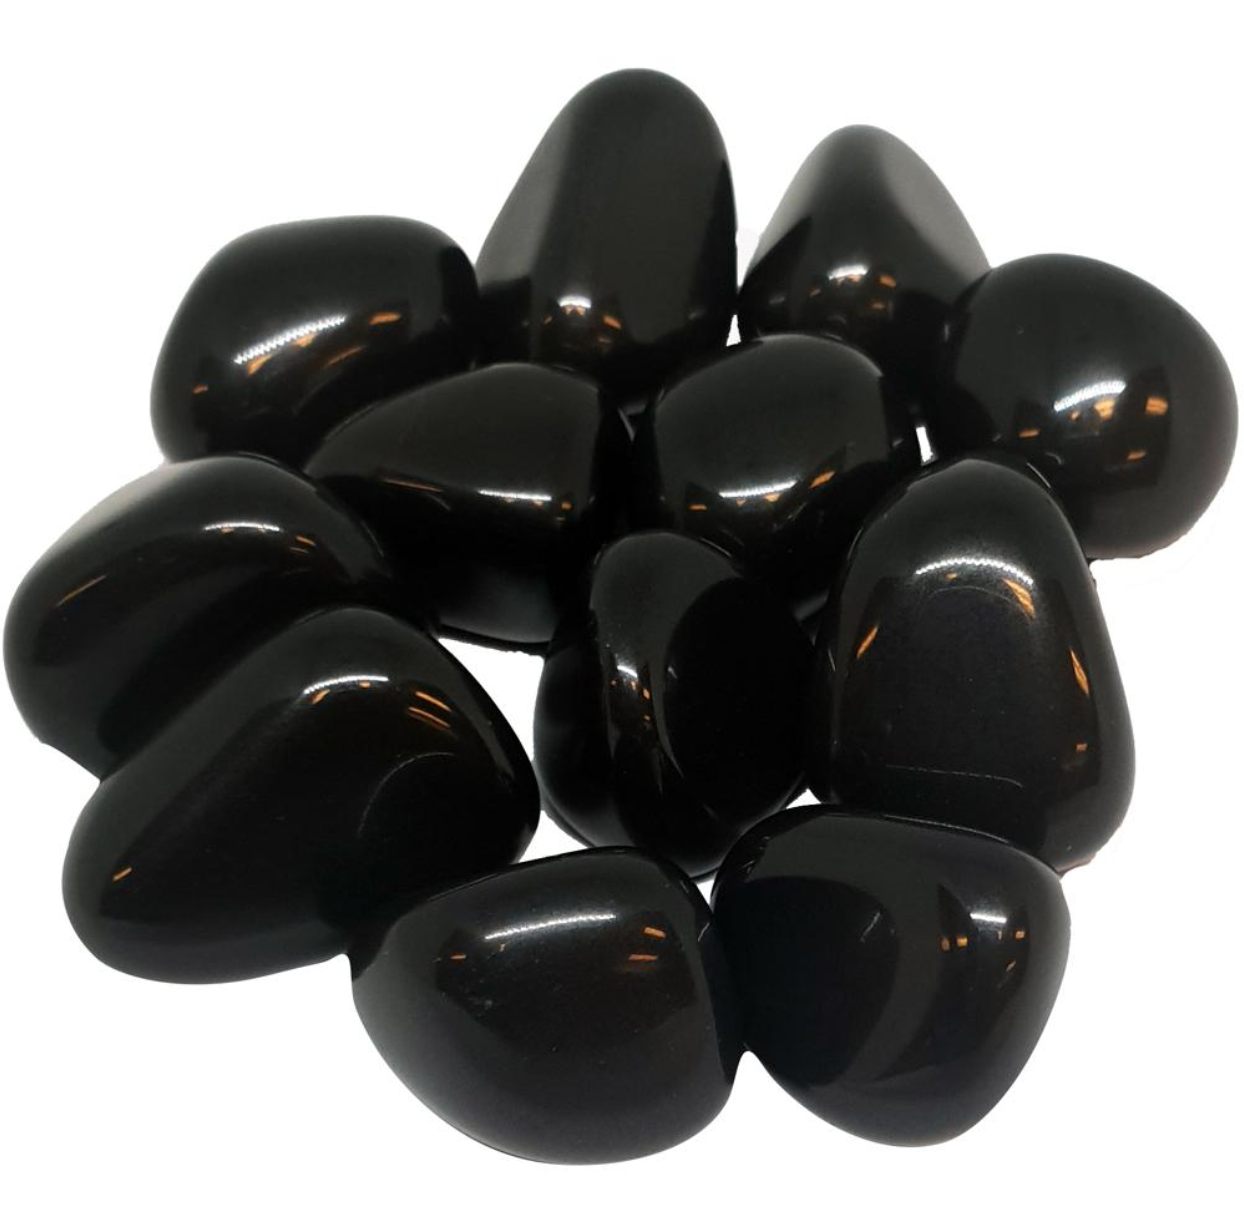 Benefits of Wearing Black Agate